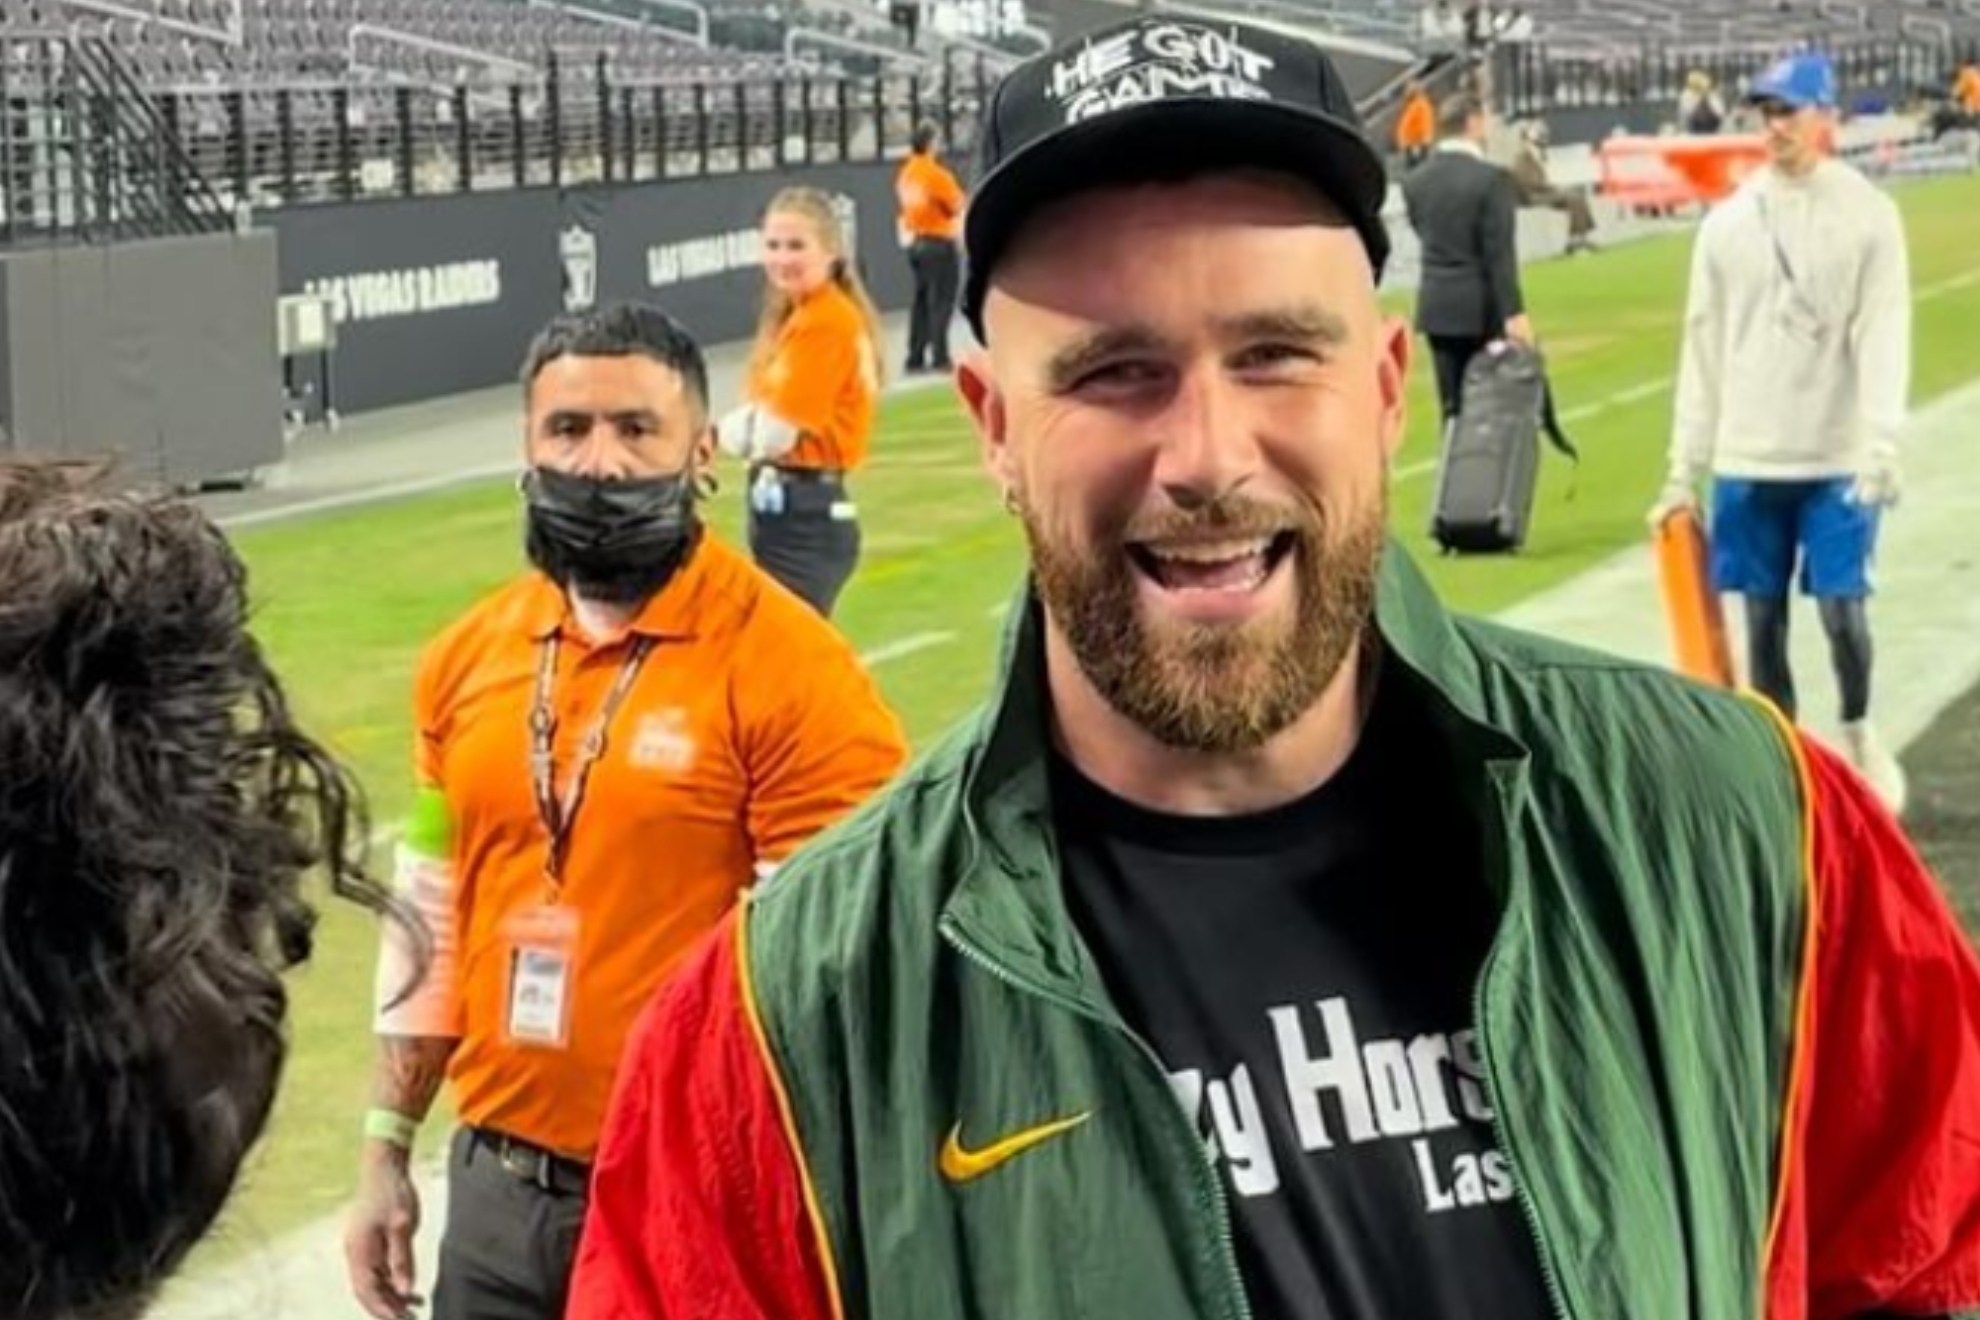 Kelce was captured by a fan in the stands after the game